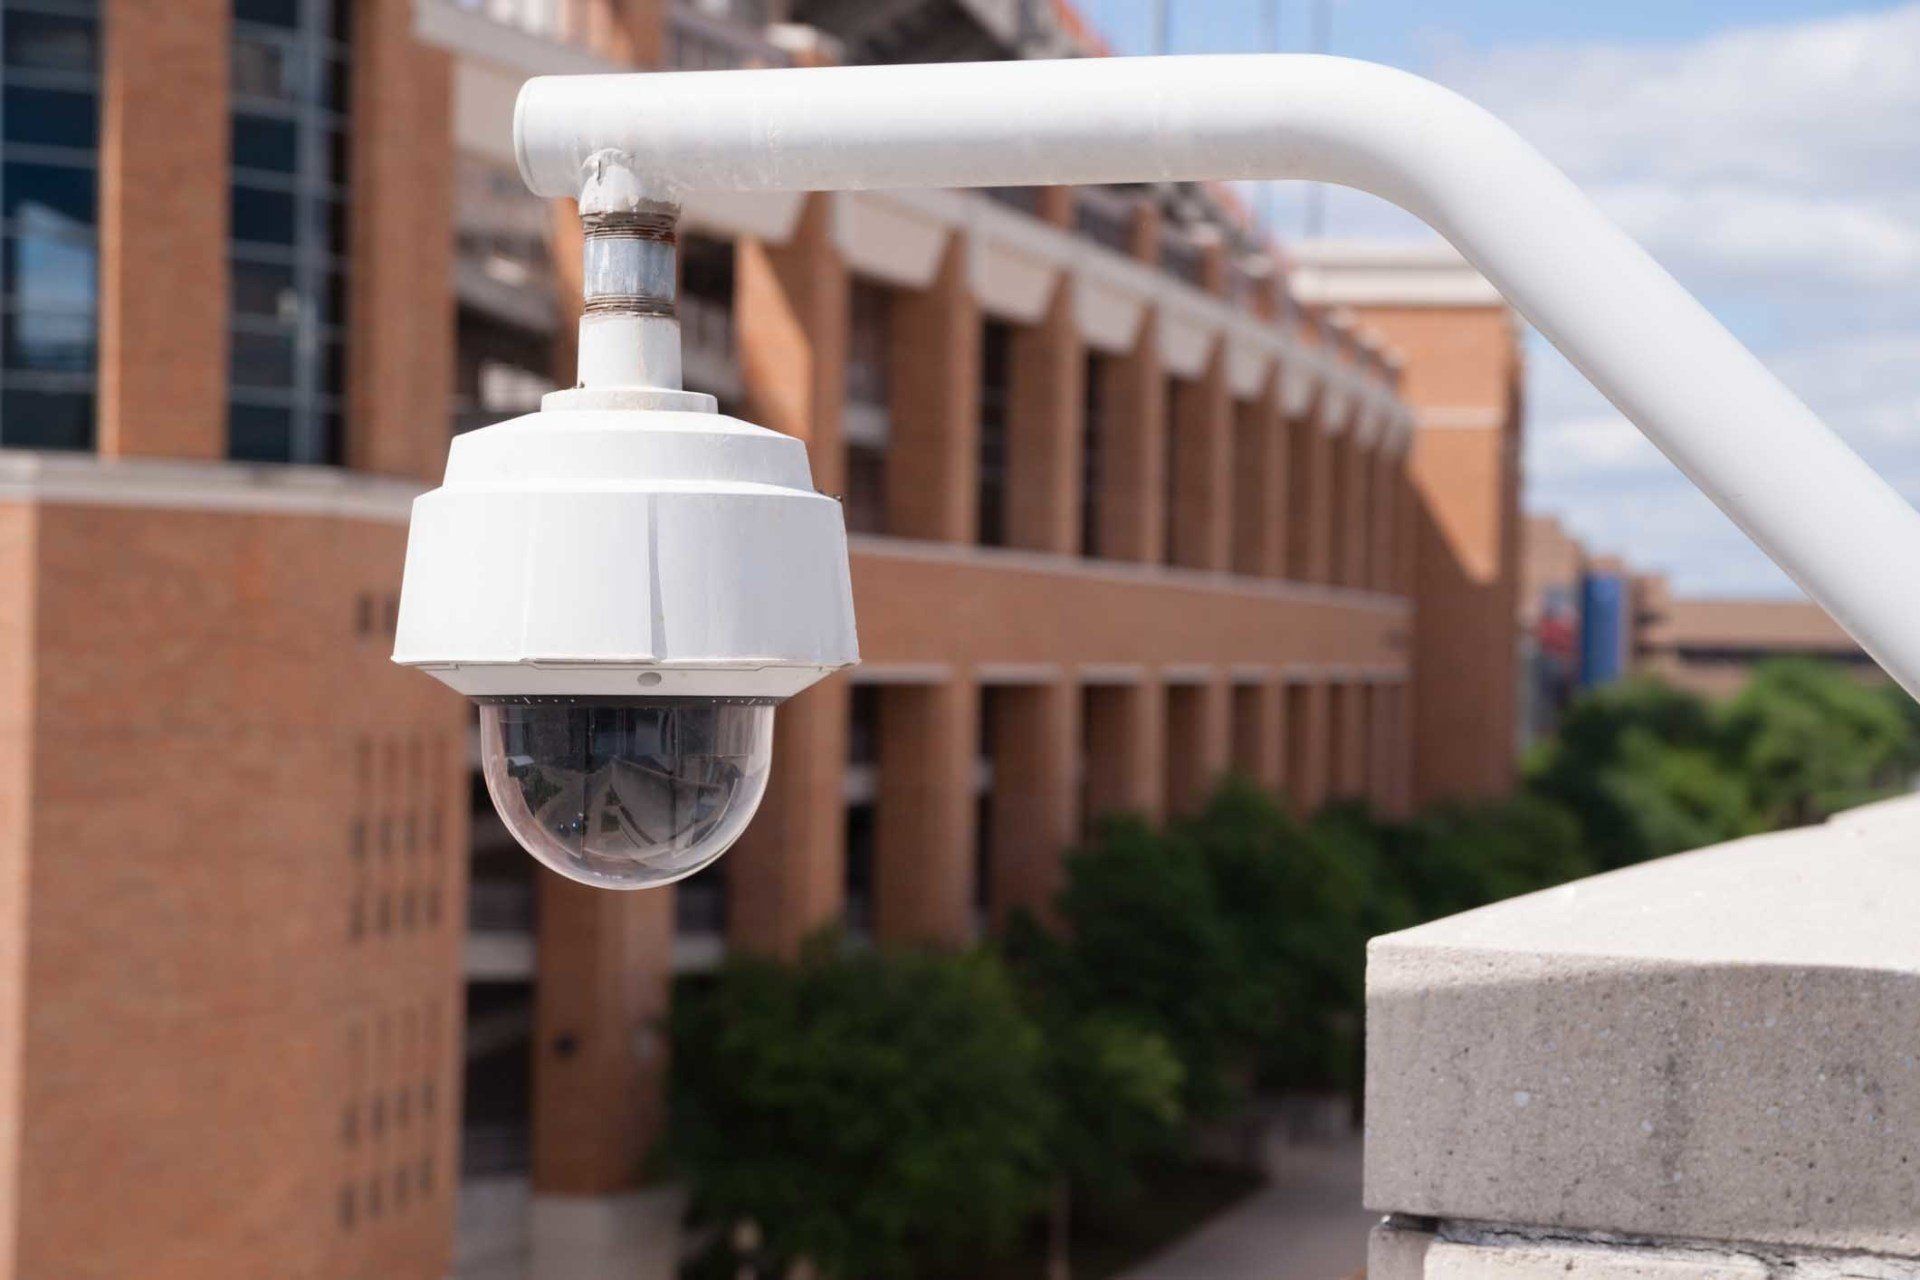 Video Security Camera Housing Mounted High on College Campus — West Monroe, LA — DSC Security & Communications LLC